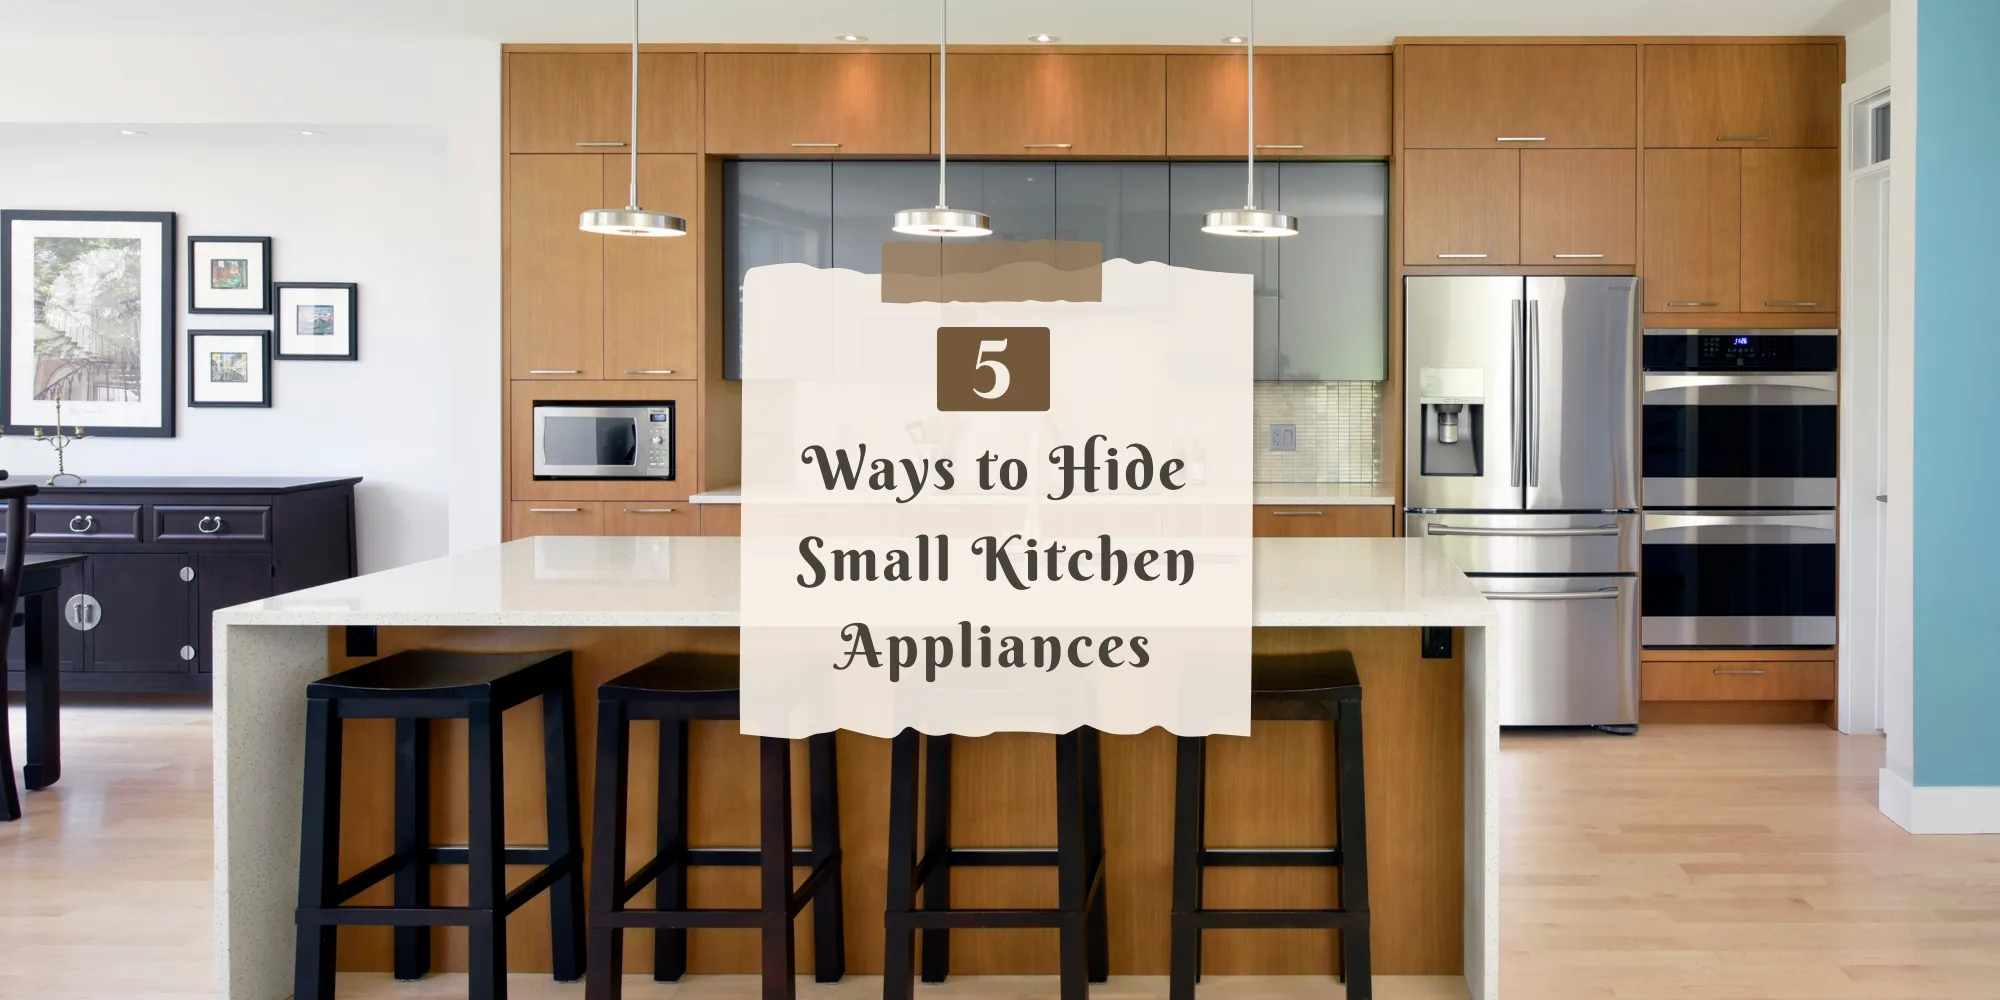 How to Pick Kitchen Appliances - Custom Appliances for an All